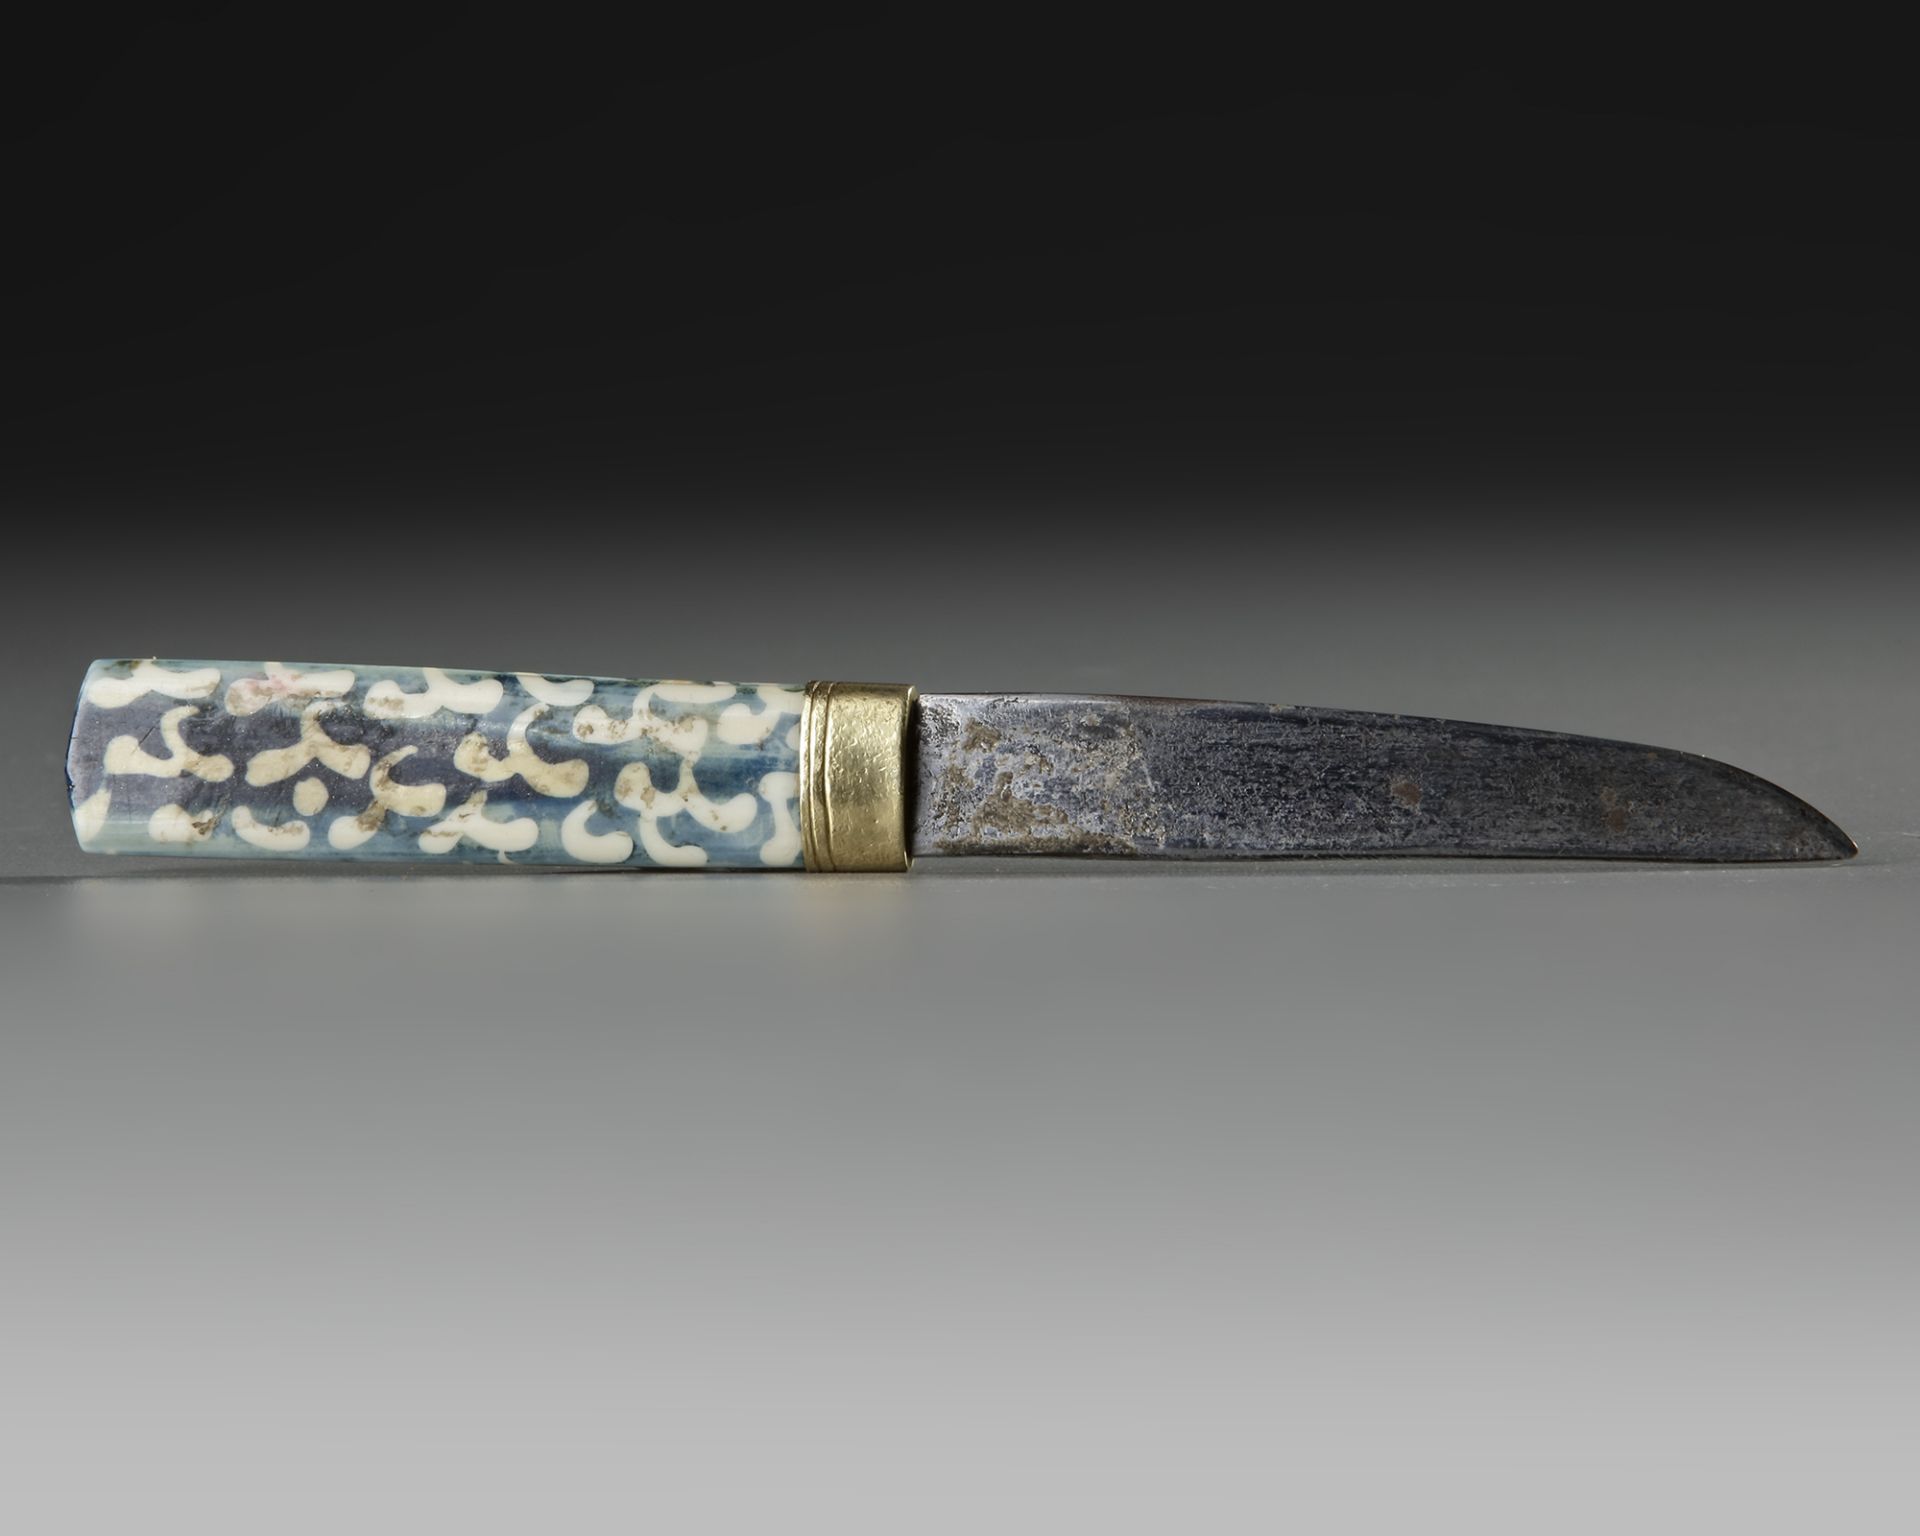 A SMALL INSCRIBED KNIFE, LATE TIMURID, 15TH-16TH CENTURY - Image 4 of 4